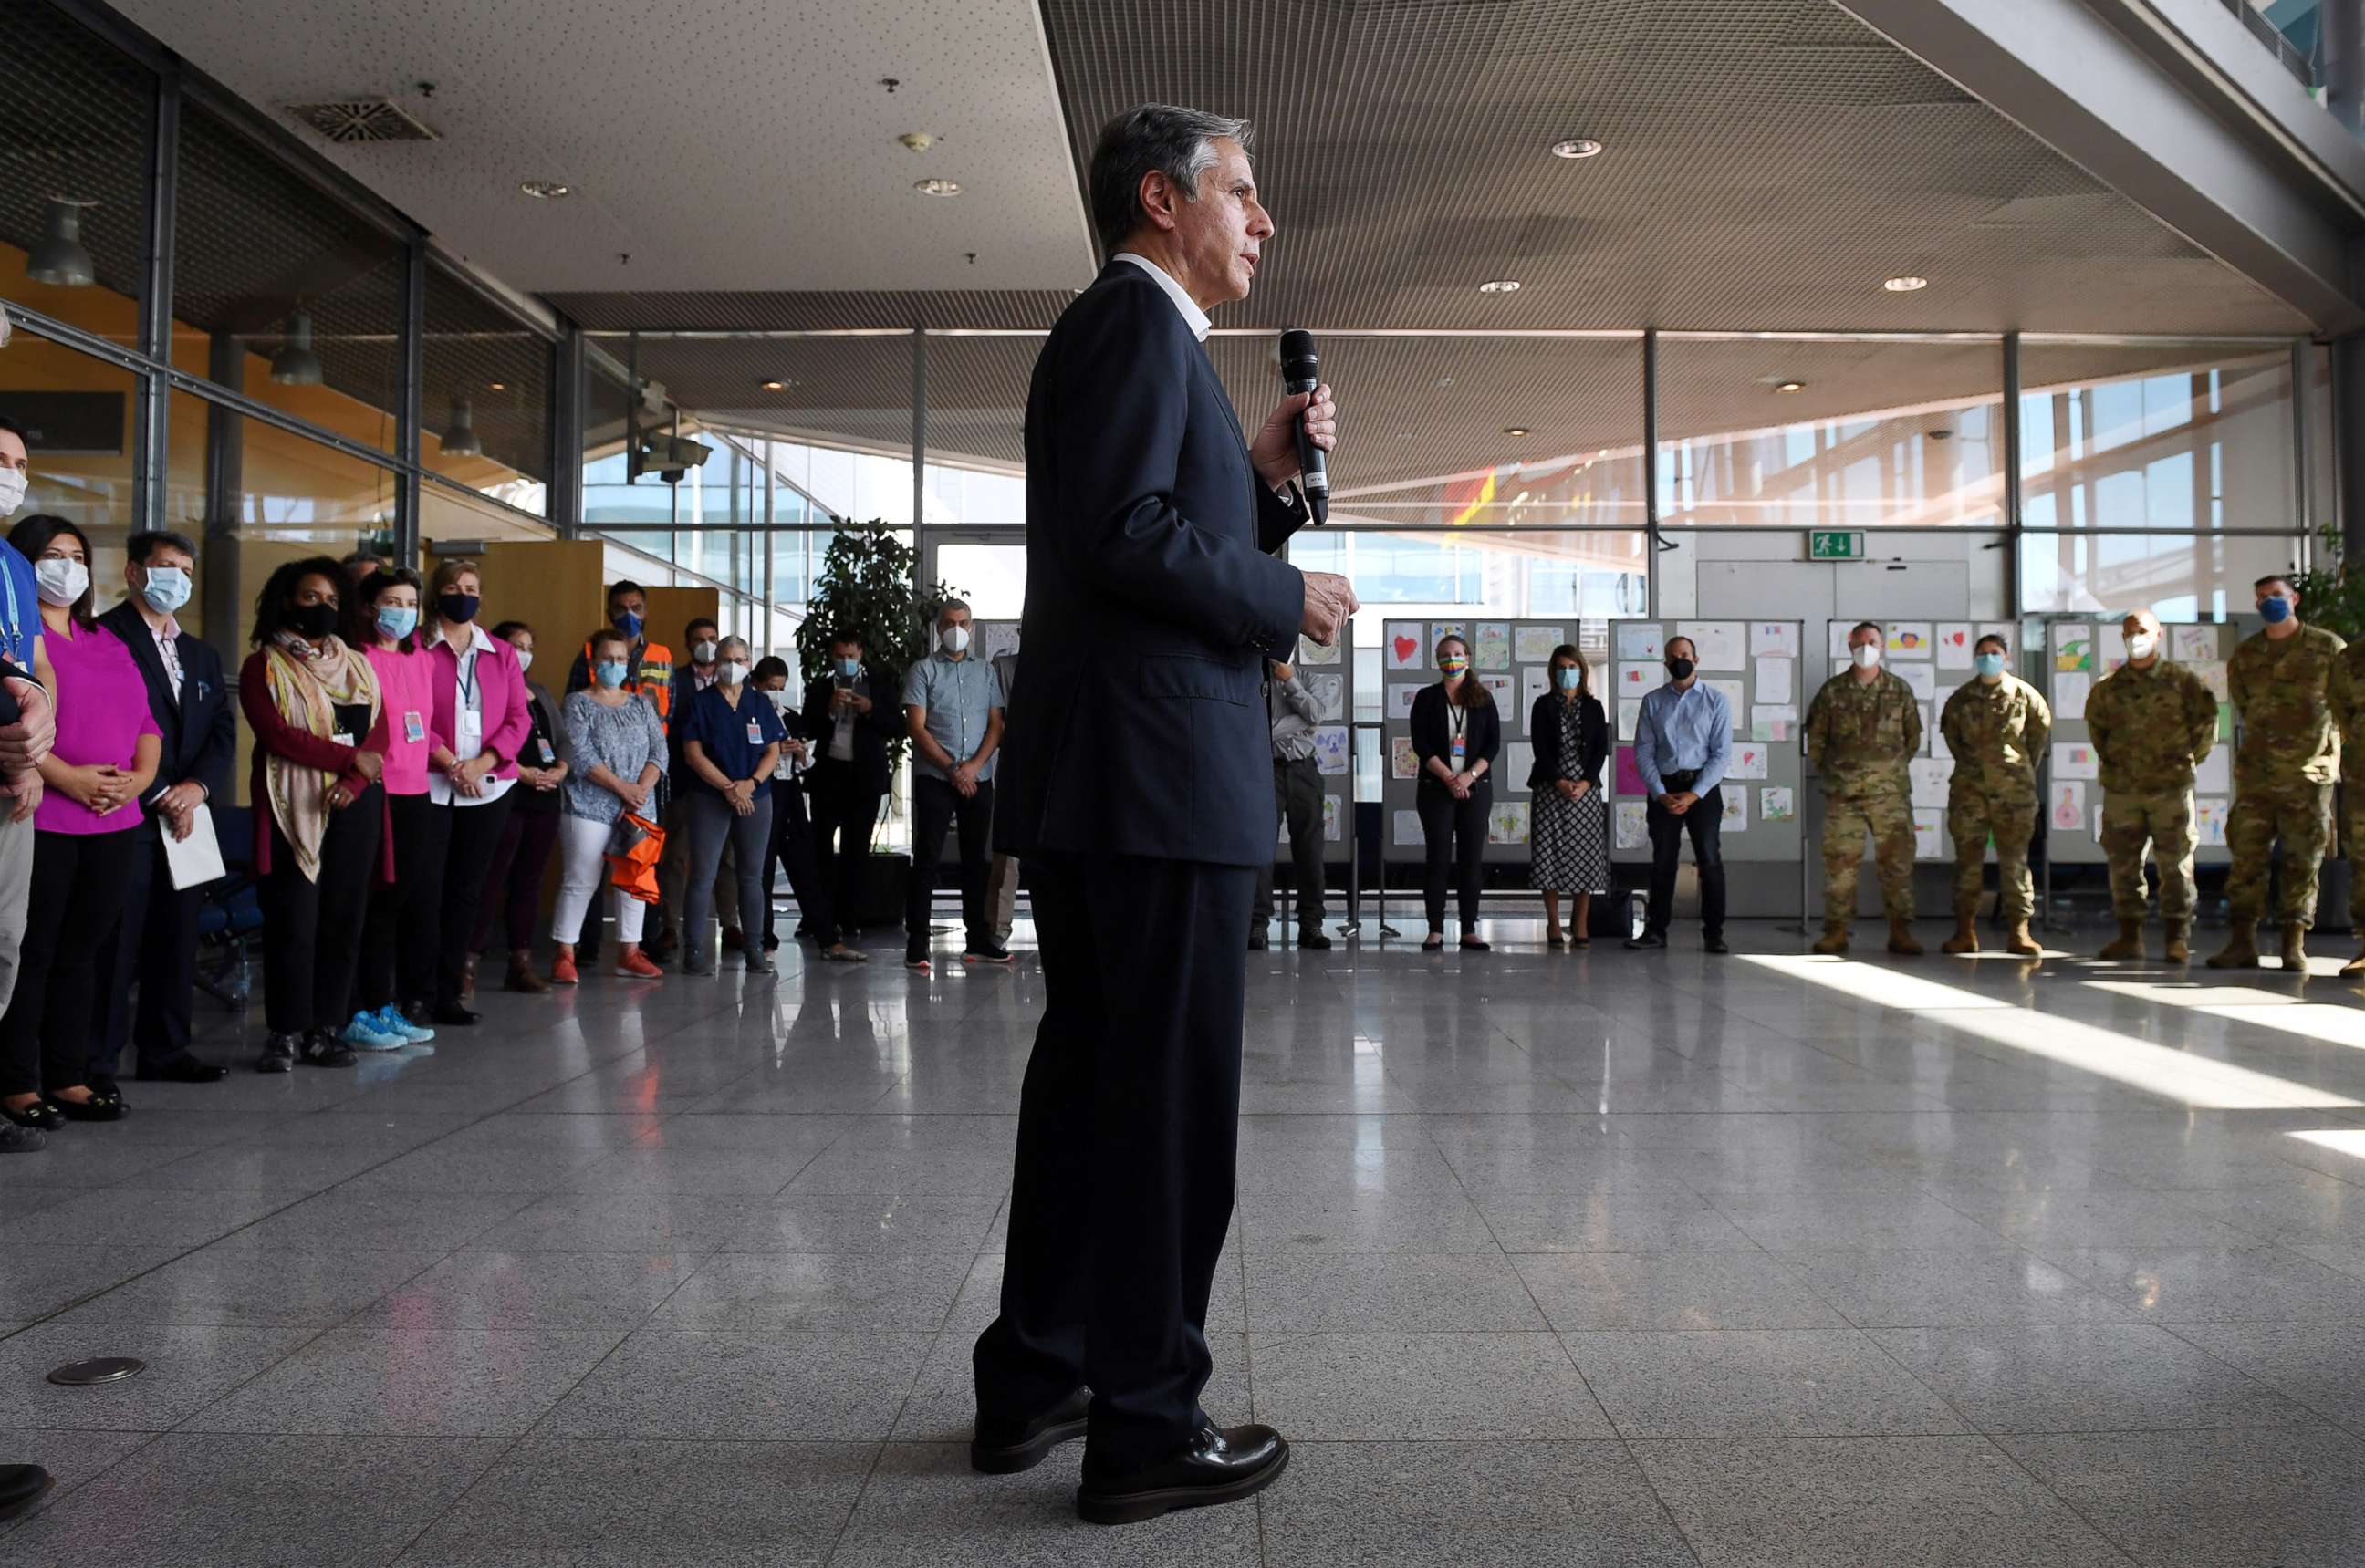 PHOTO: Secretary of State Antony Blinken speaks during a meeting with the Evacuation Operations staff at Ramstein Air Base in Germany, Sept. 8, 2021.